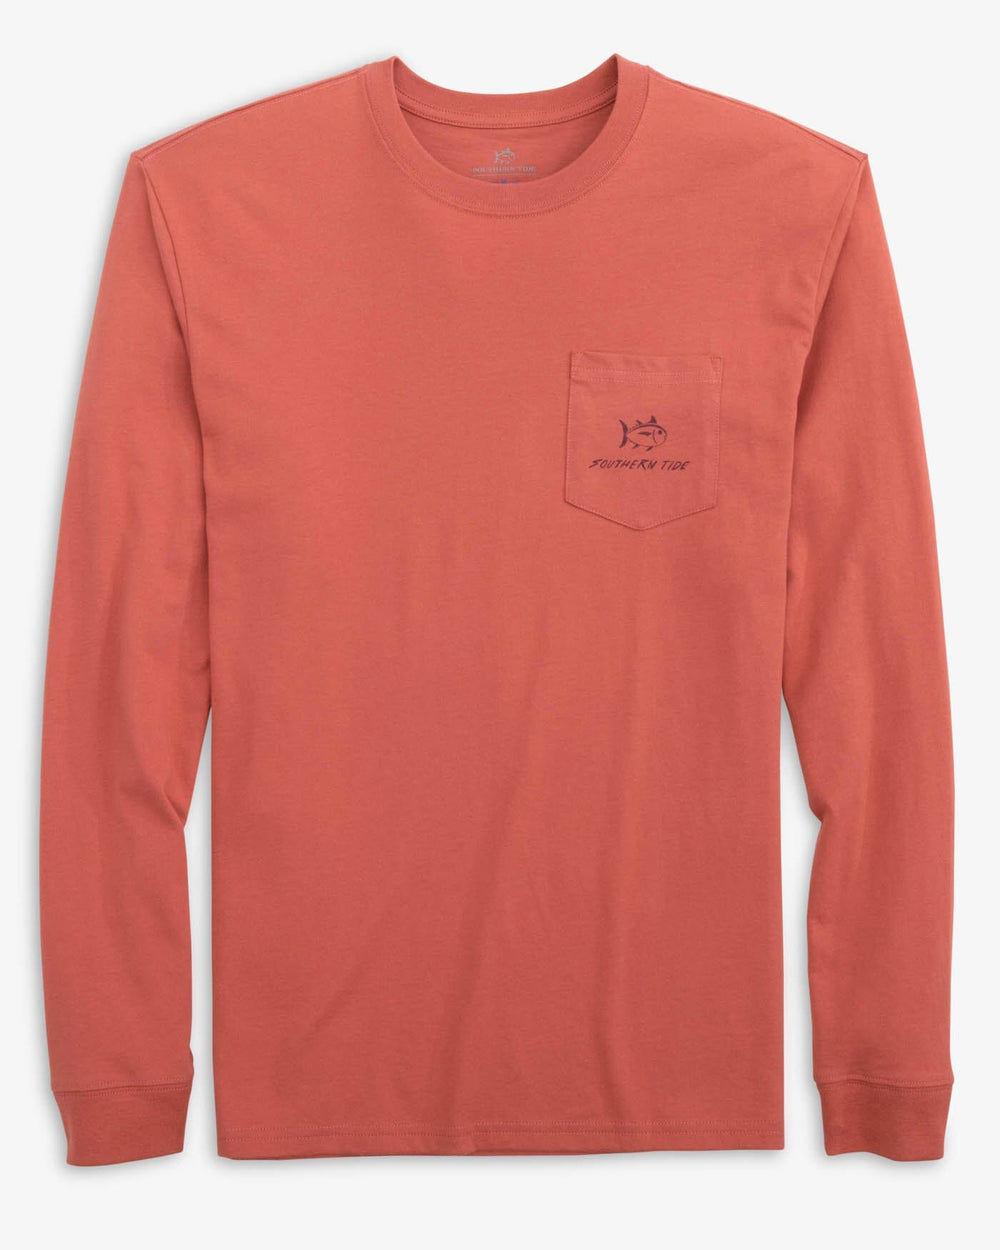 The front view of the Southern Tide Sign To Sail Long Sleeve T-Shirt by Southern Tide - Dusty Coral